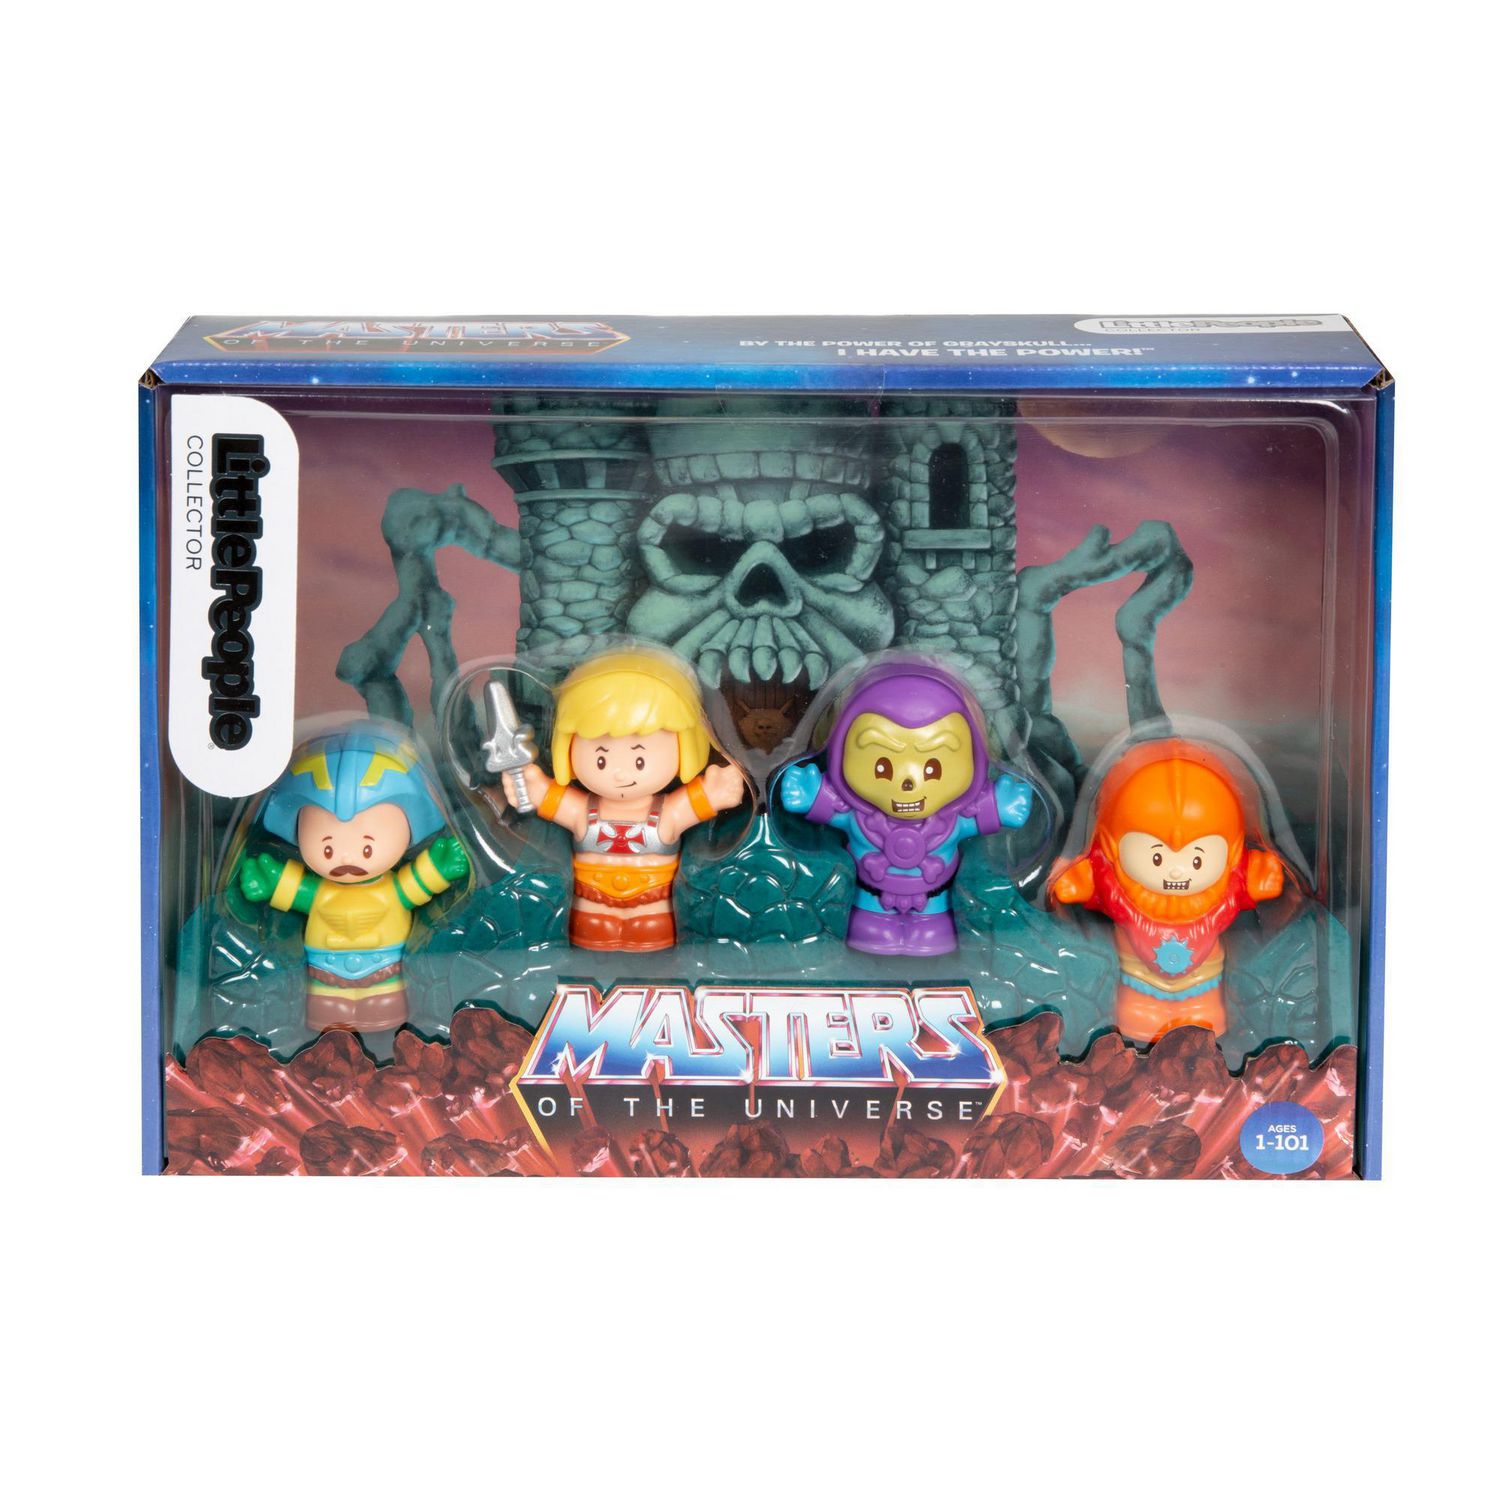 Little People Collector Masters of the Universe Figure Set